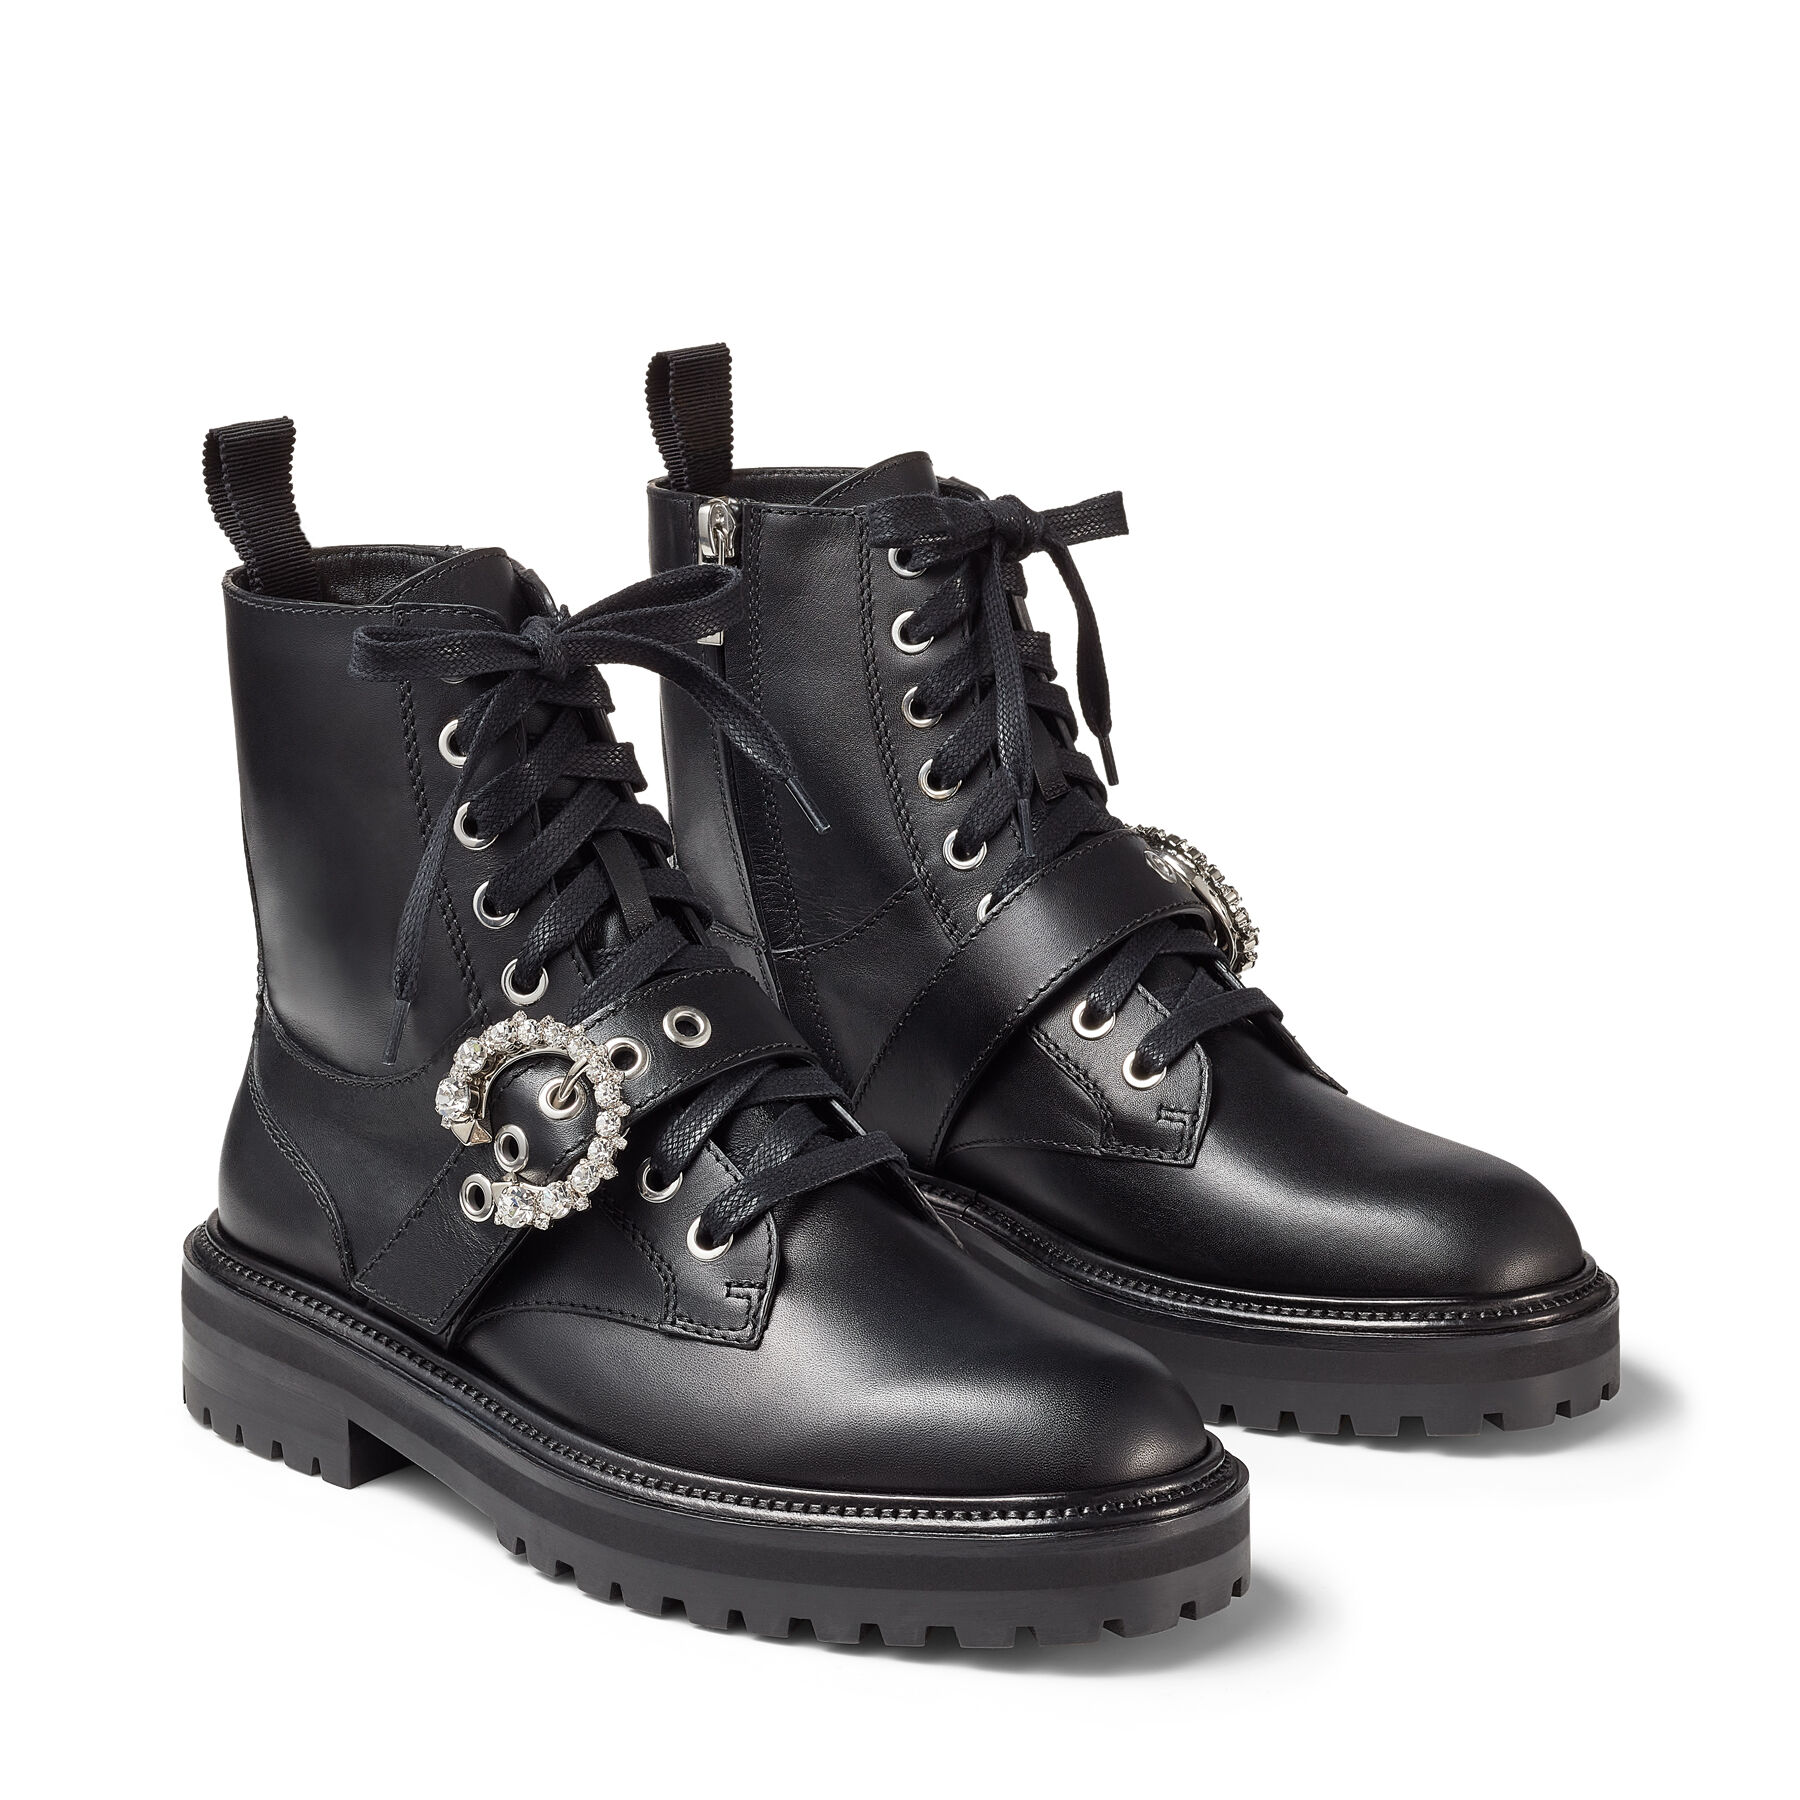 Black Soft Calf Leather Combat Boots with Crystal Buckle | CORA FLAT ...